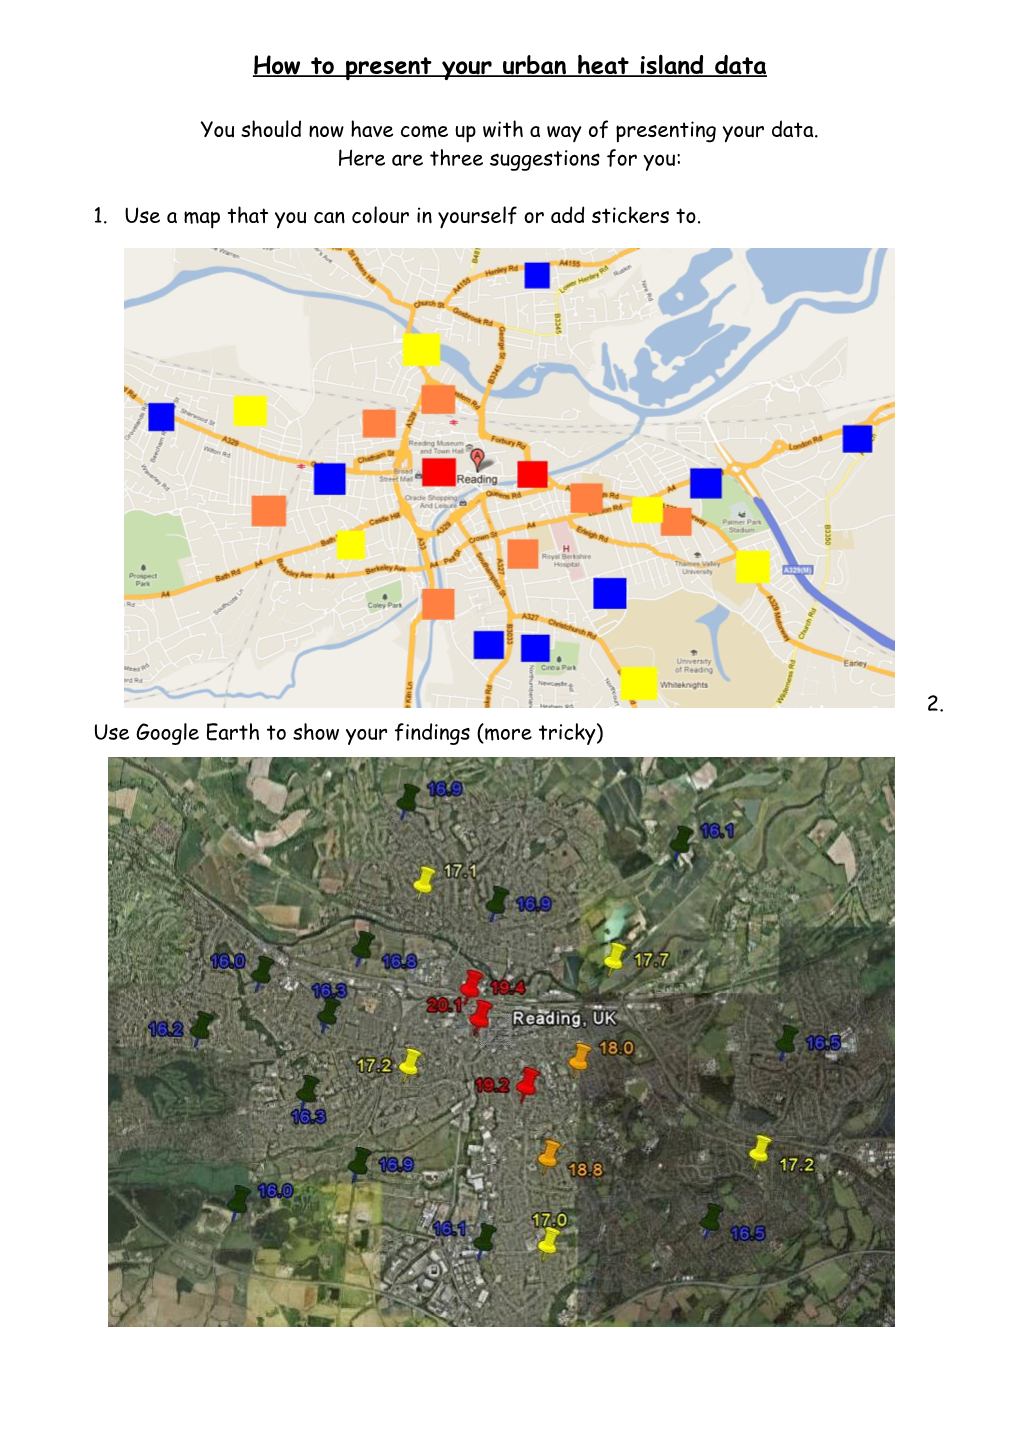 How to Present Your Urban Heat Island Data